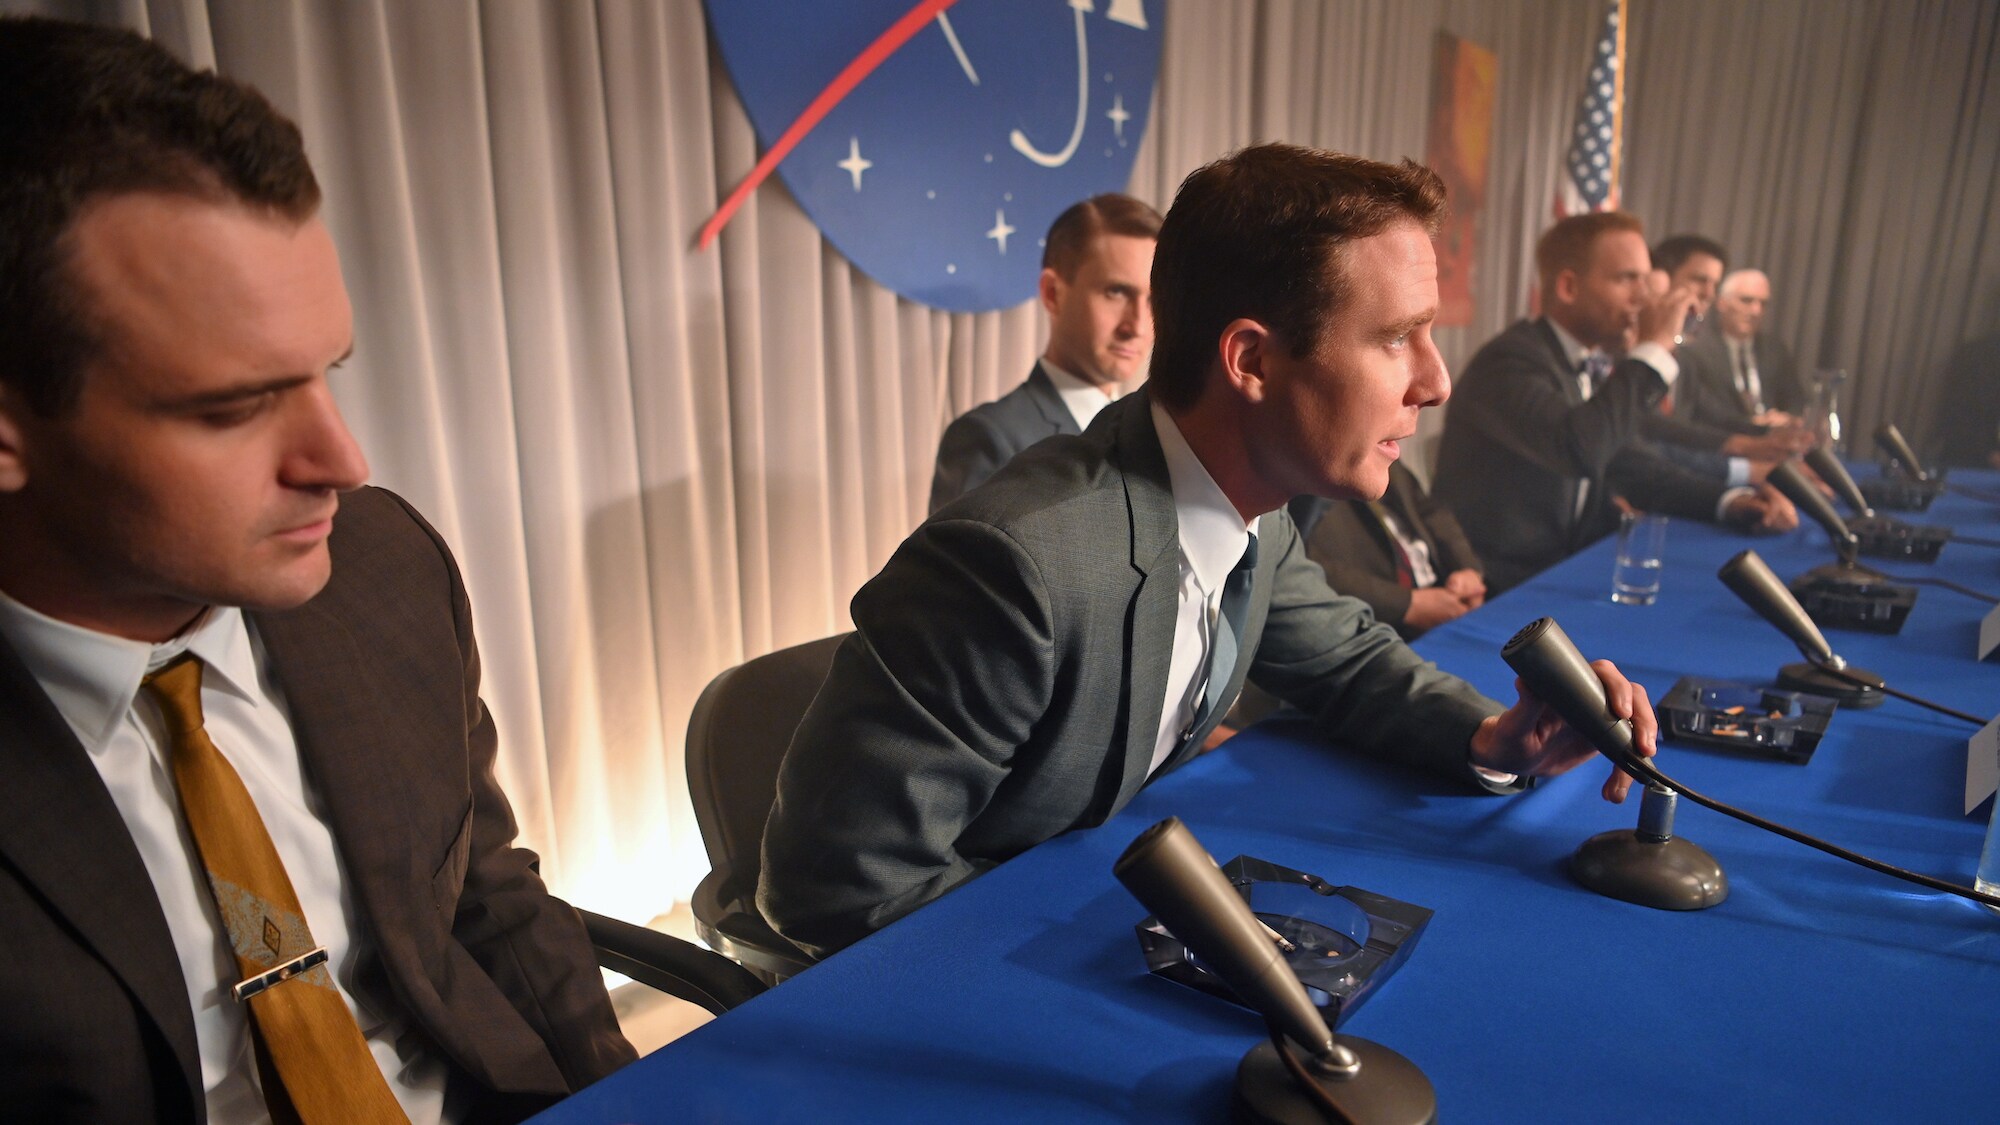 Alan Shepard (second from left), played by Jake McDorman, and the other Mercury astronauts during a press conference in National Geographic's THE RIGHT STUFF streaming on Disney+. (National Geographic/Gene Page)